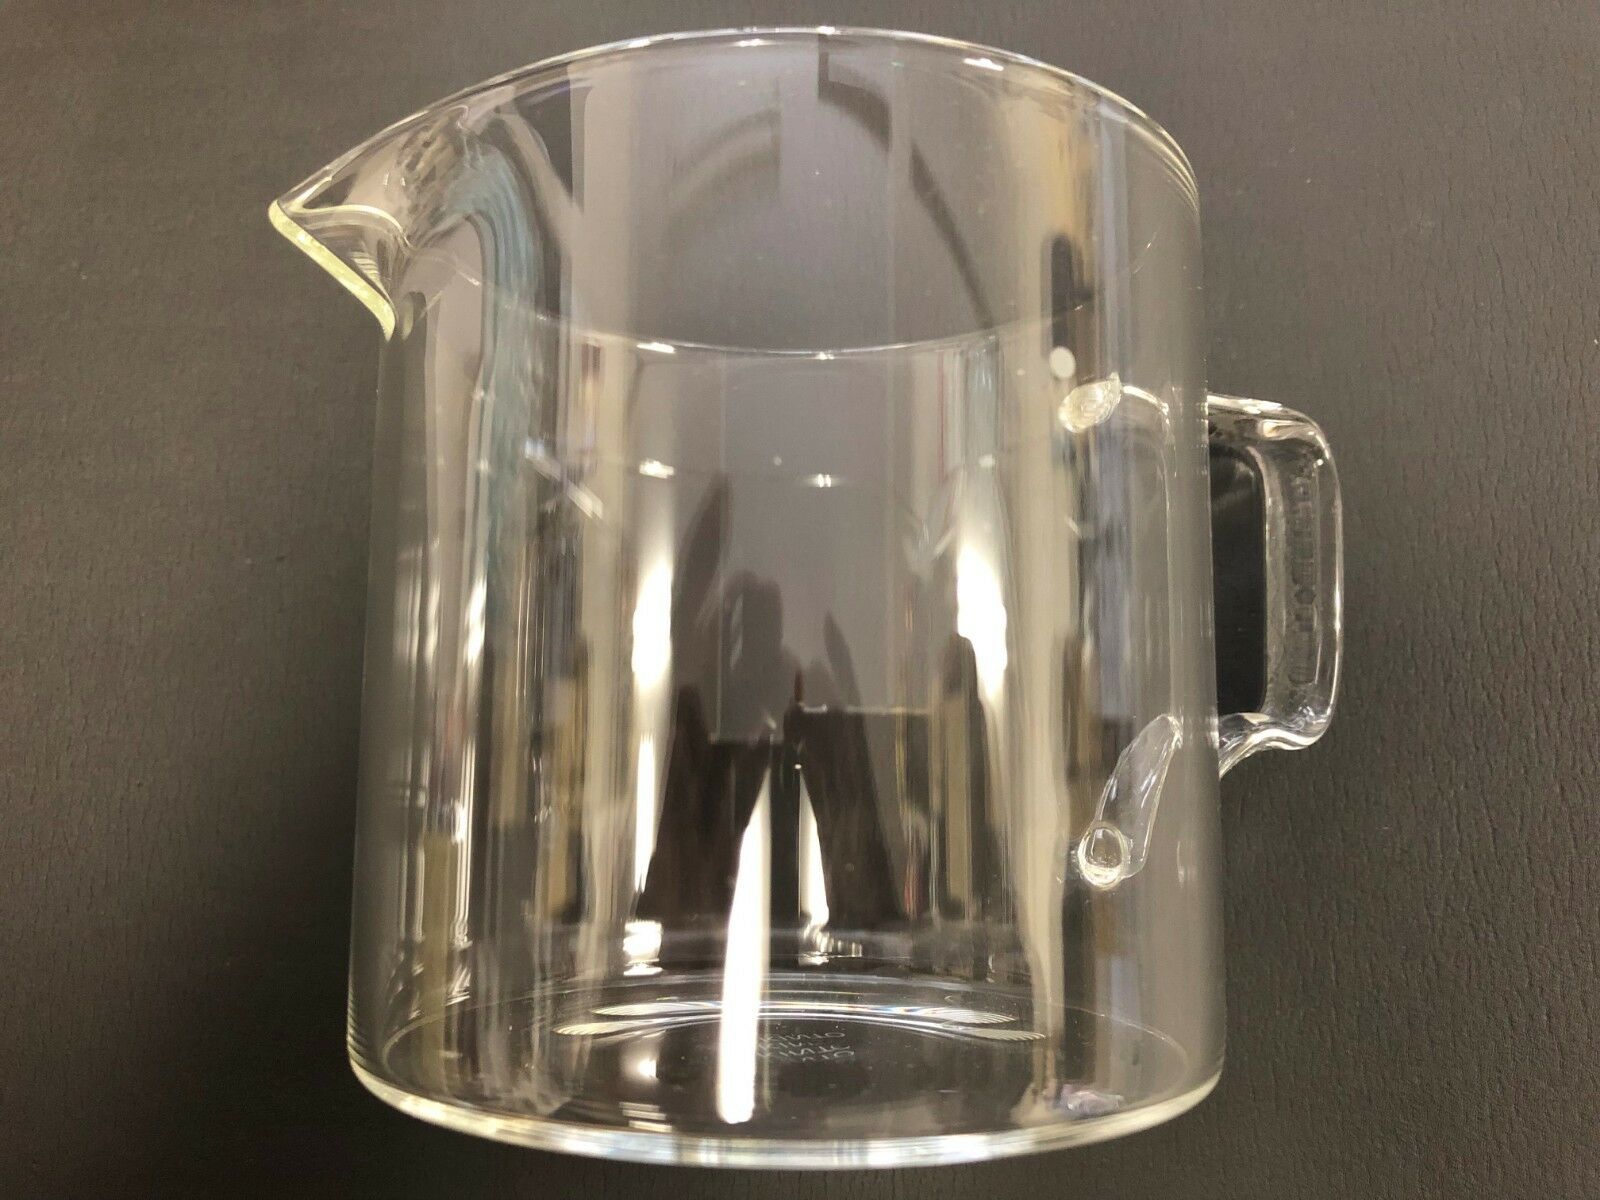 Kinto Oct Coffee Jug 300ml 28887 Heat Resistant Glass From Japan